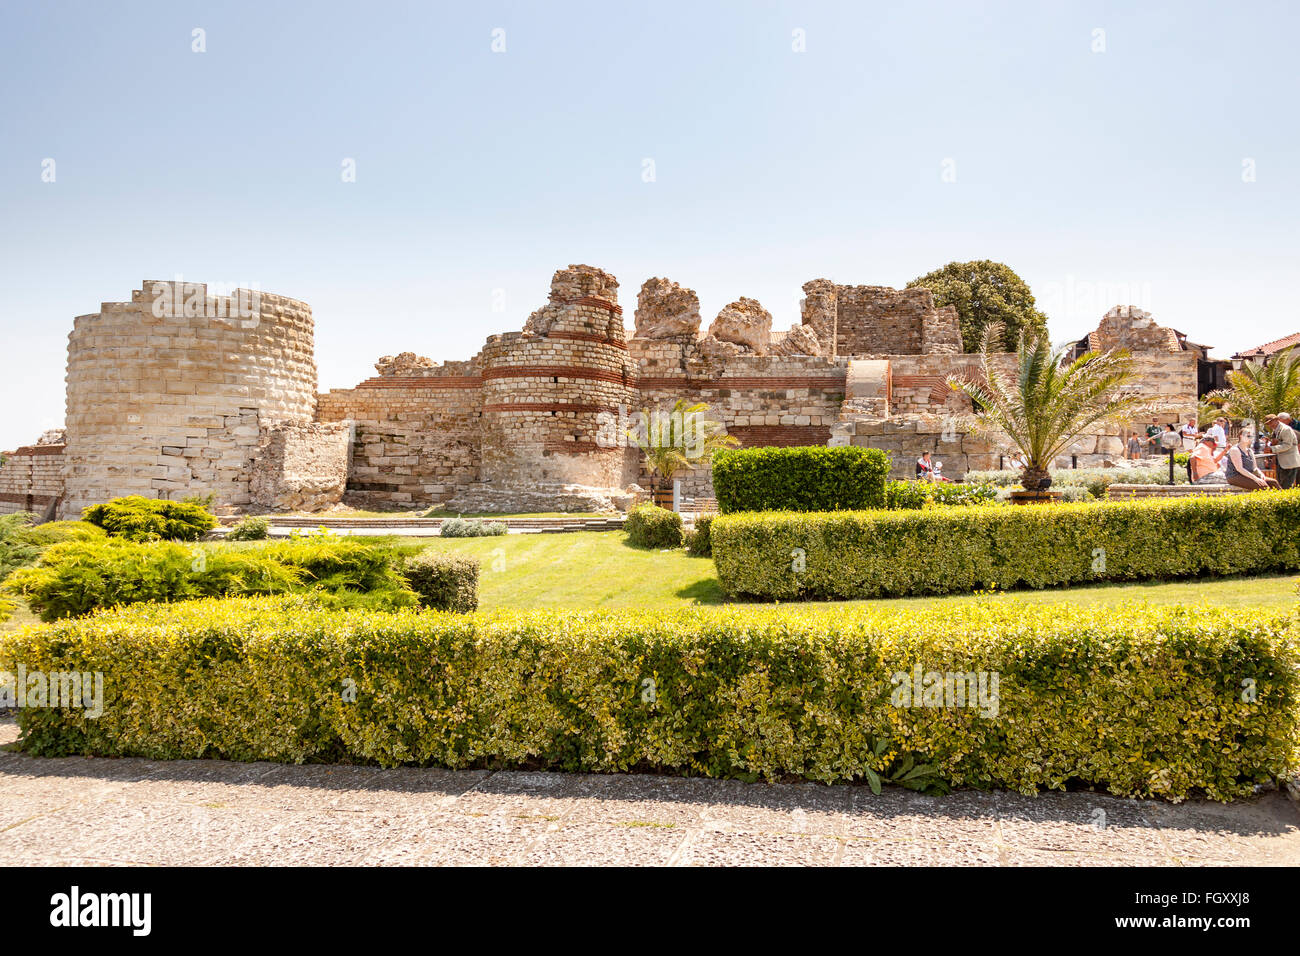 Remains Of Ancient Fortress Walls Nessebar Bulgaria Stock Photo Alamy